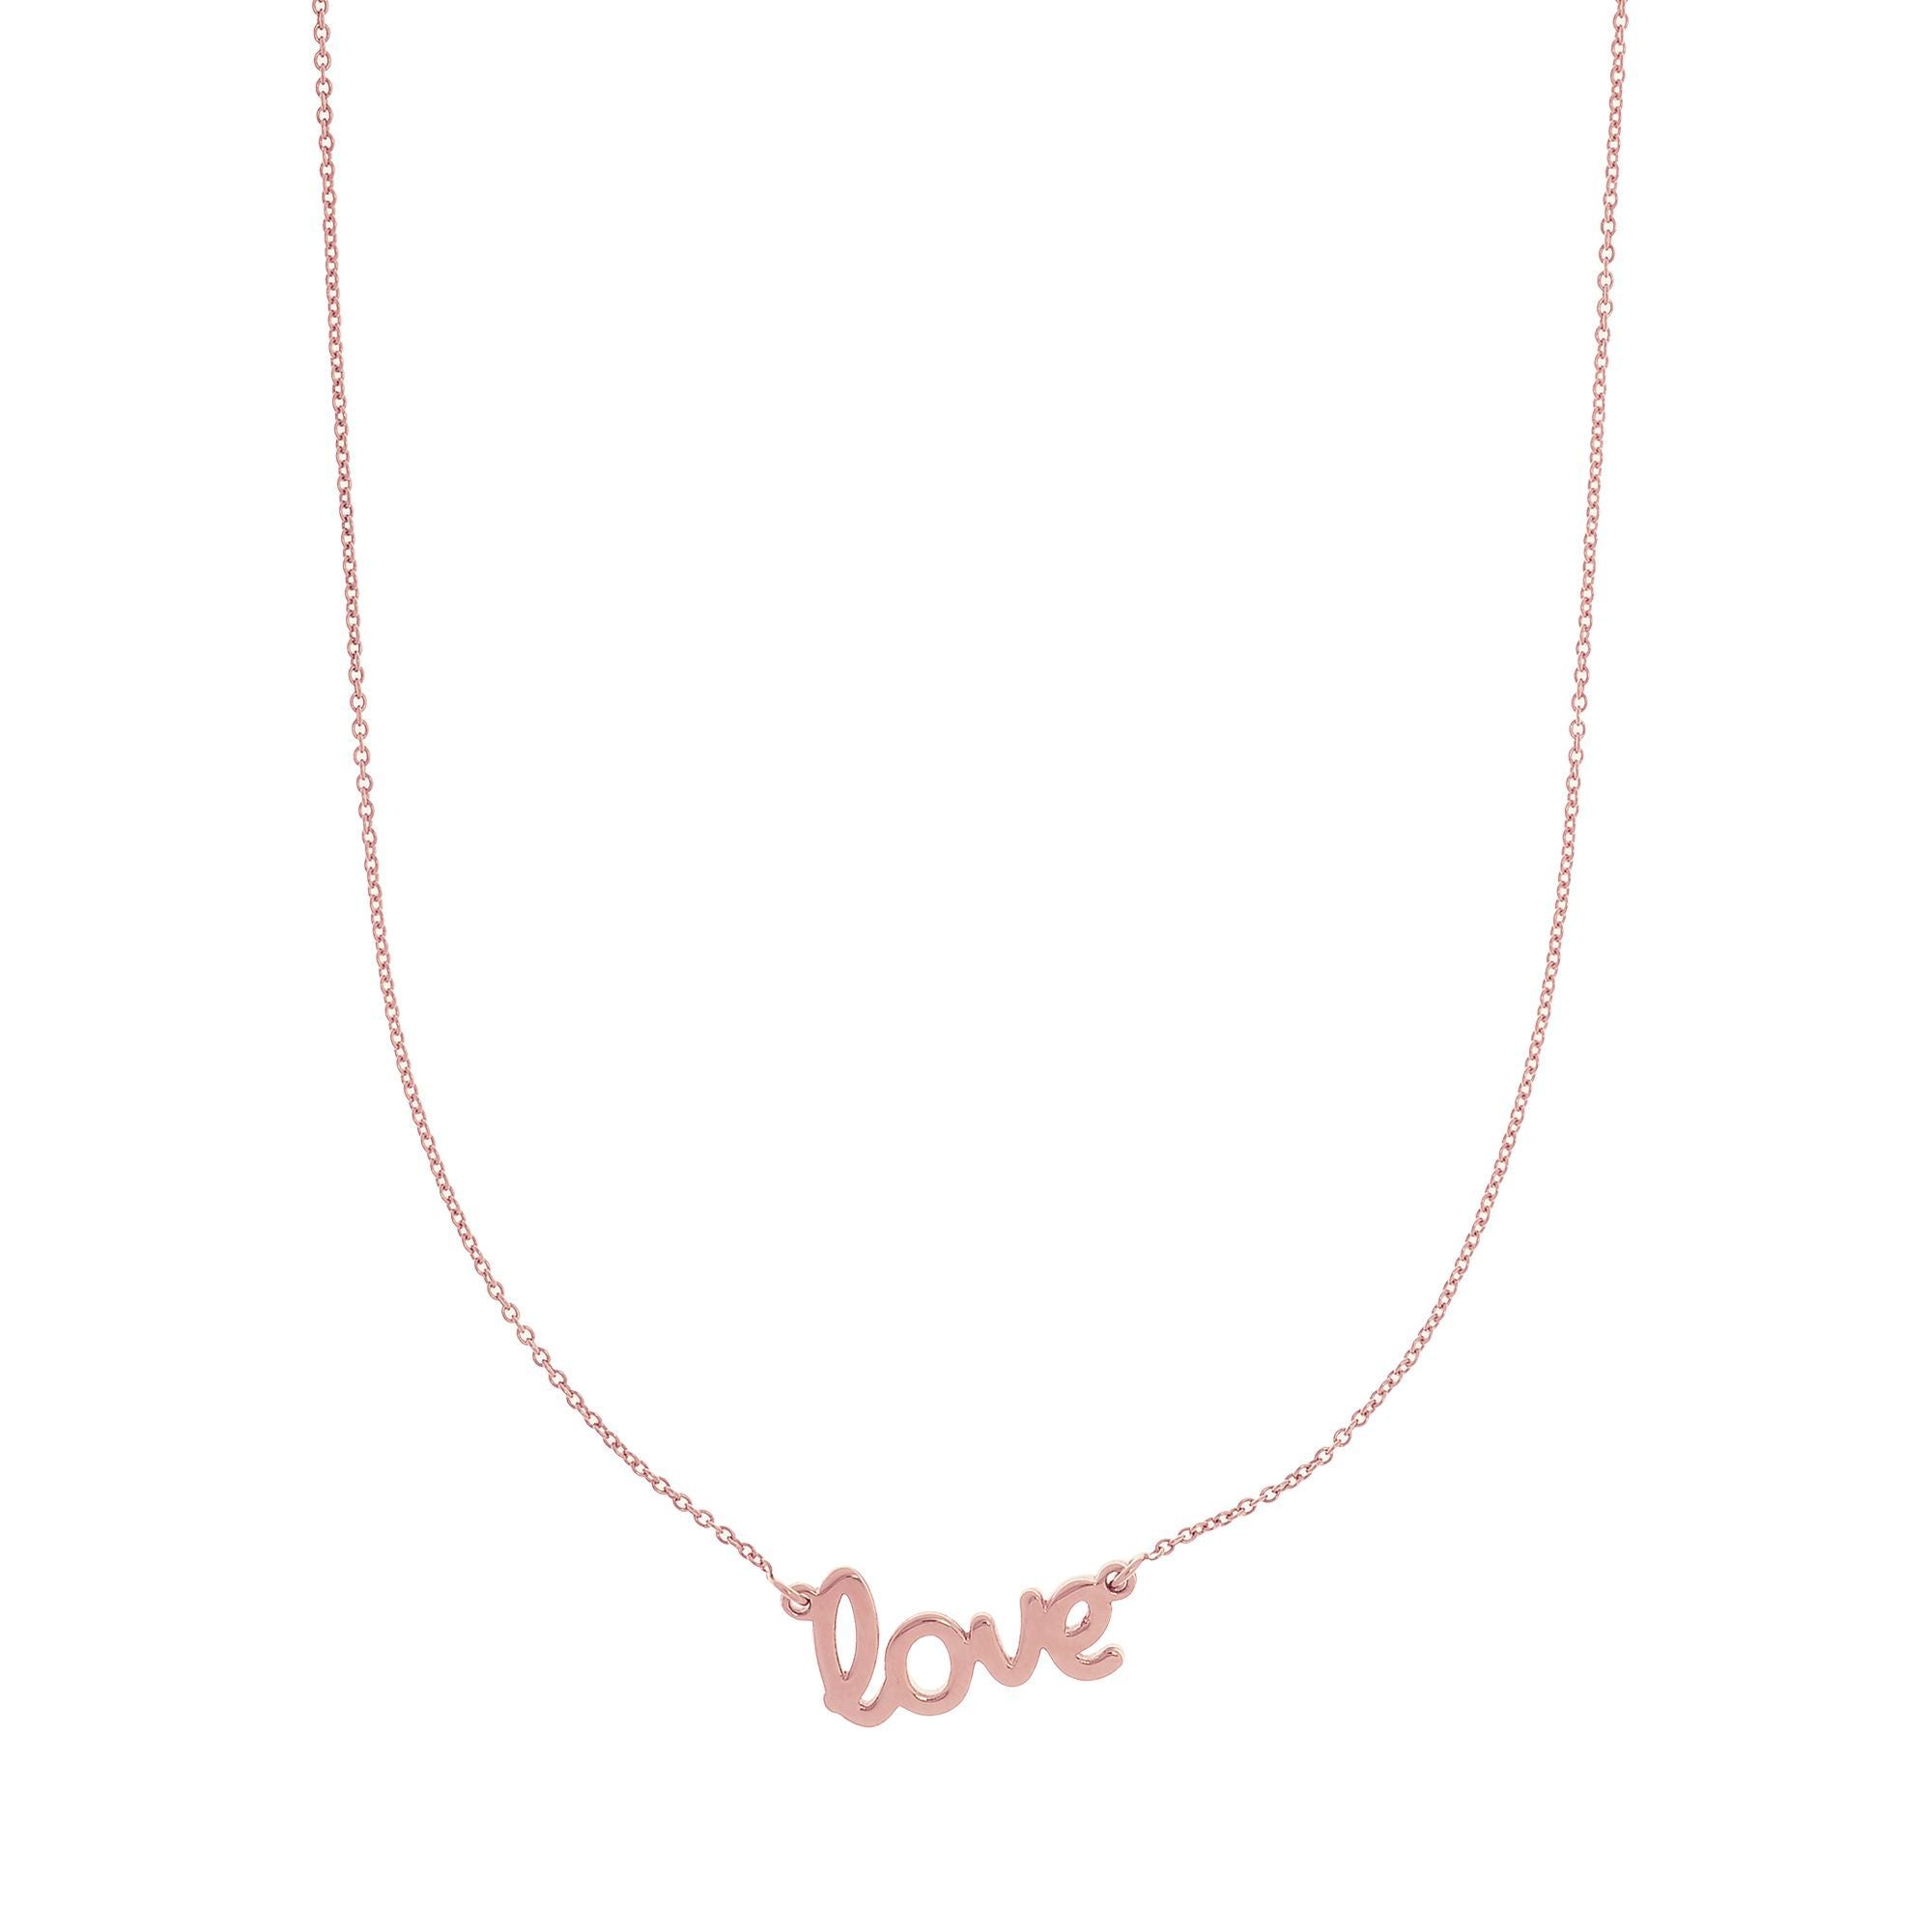 Flat Scripted Medium "LOVE" Alphabet Beautiful and Cute Gold Necklace - wingroupjewelry